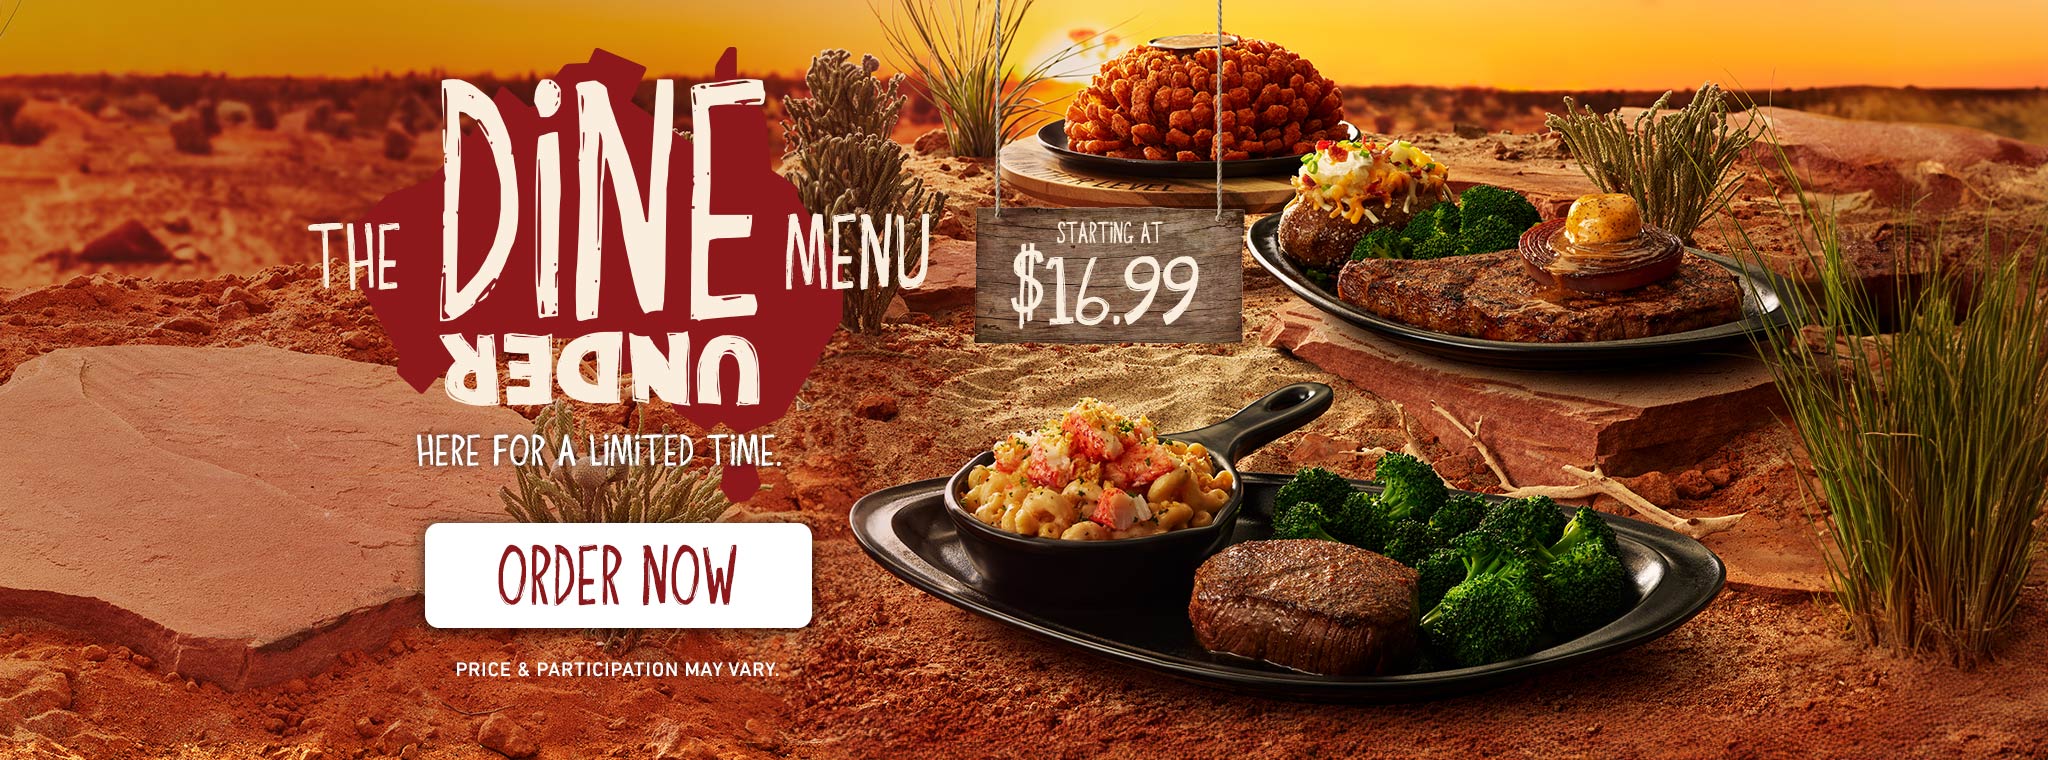 The Dine Under Menu Starting At $16.99. Here For A Limited Time. ORDER NOW. Price & participation may vary.